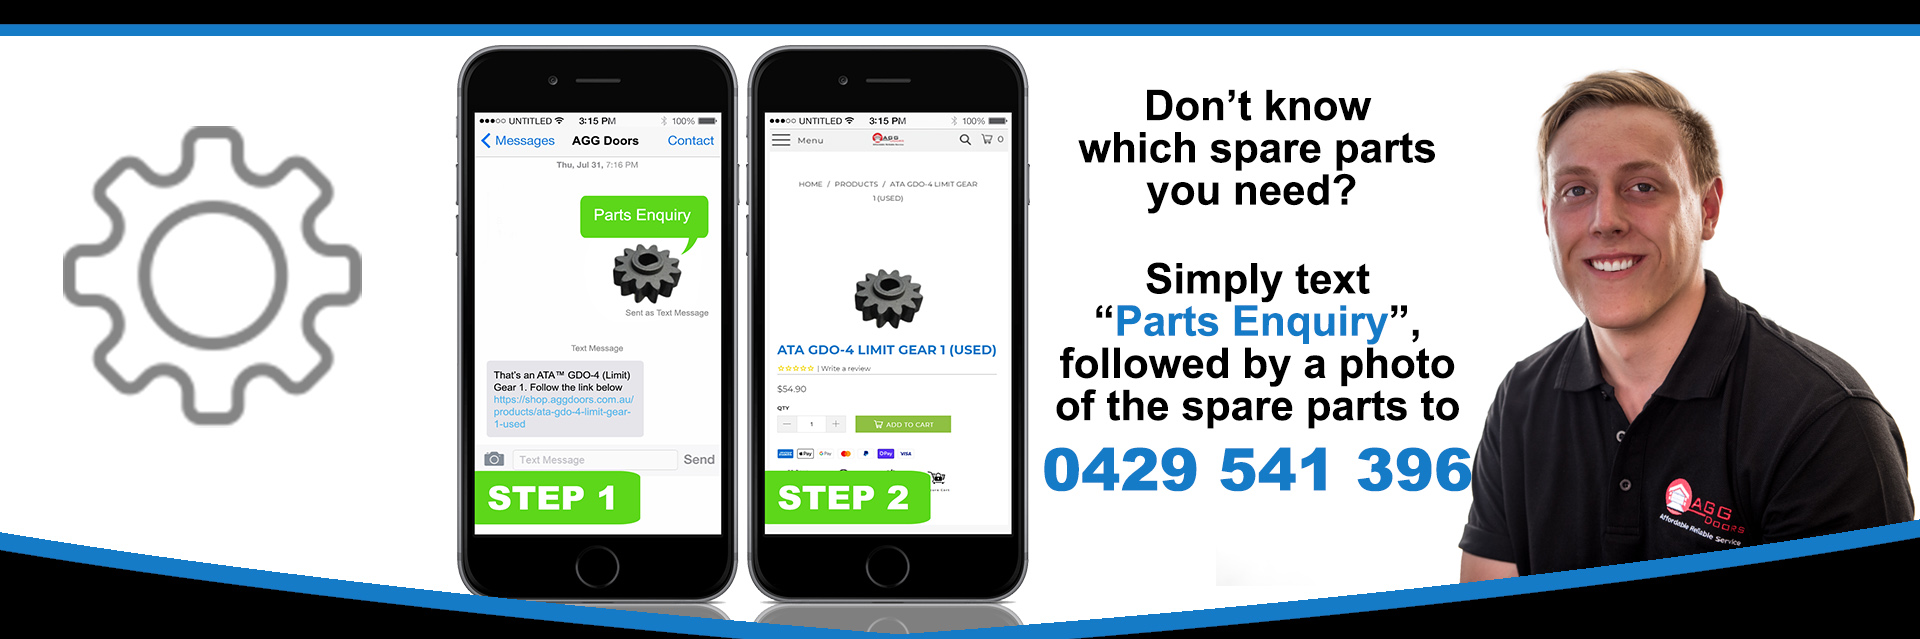 Instruction on how to text for spare parts enquiry